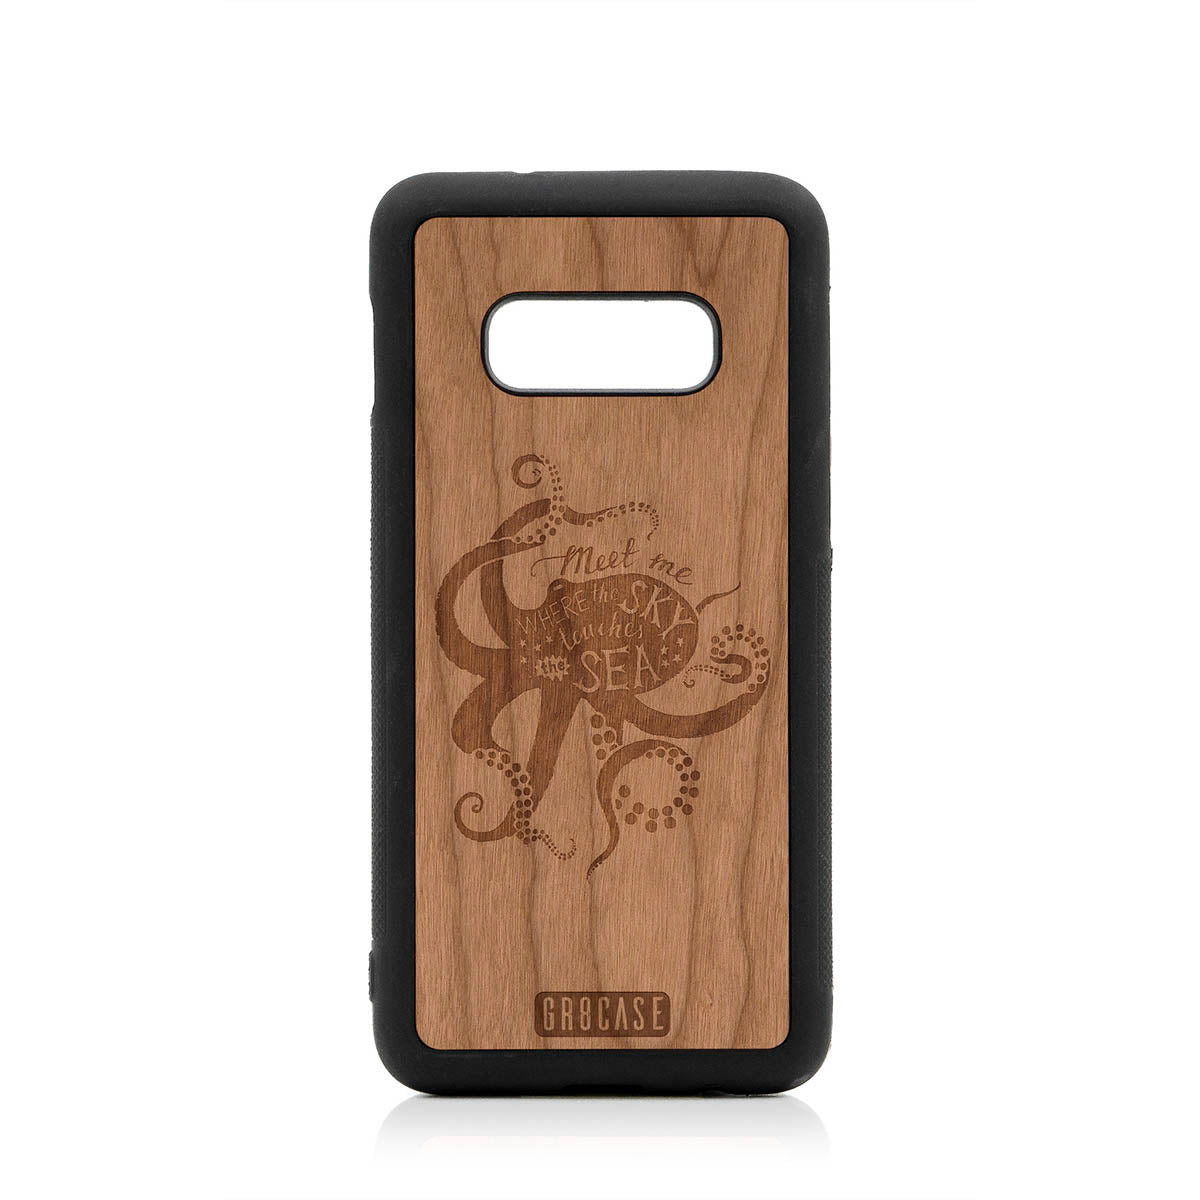 Meet Me Where The Sky Touches The Sea (Octopus) Design Wood Case For Samsung Galaxy S10E